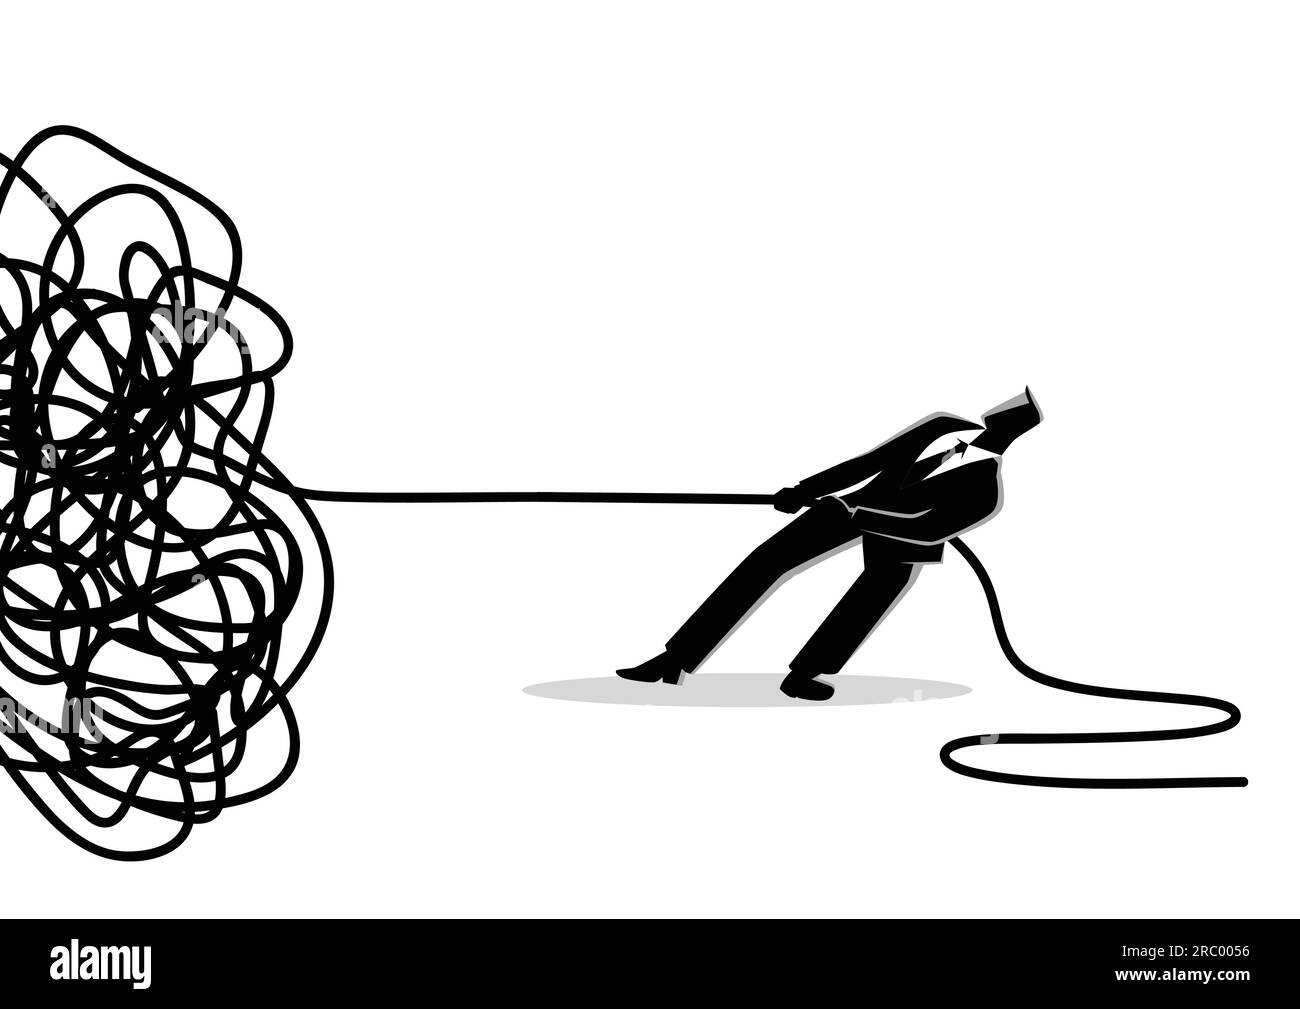 Business concept vector illustration of a businessman trying to unravel ...